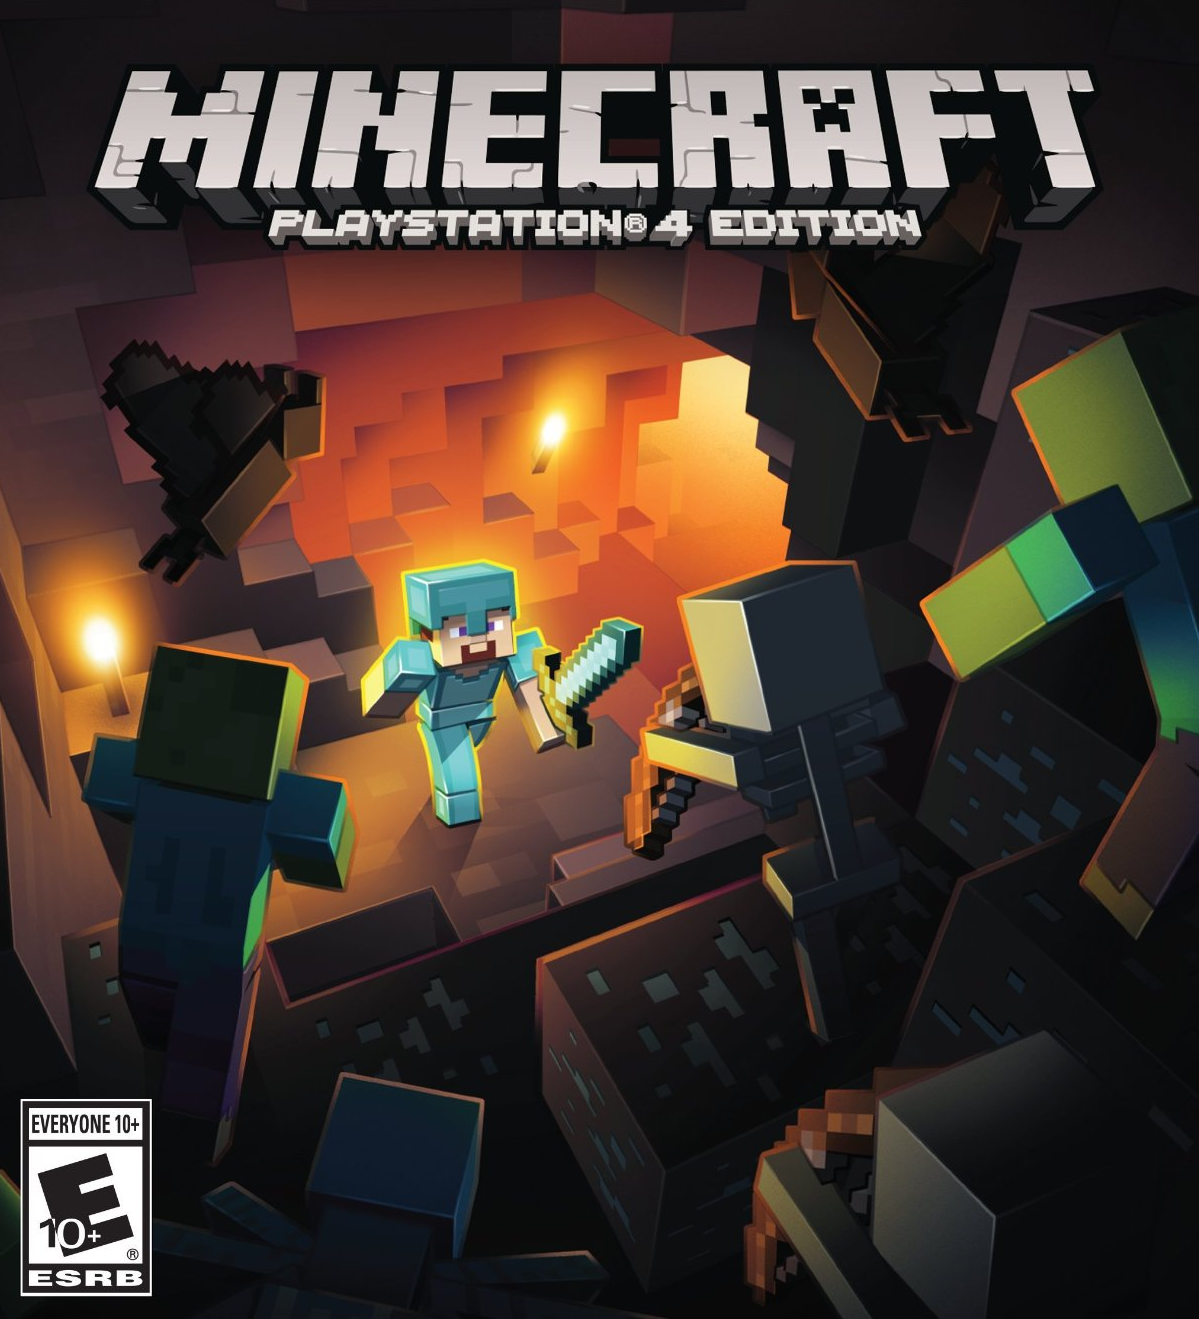 what version is minecraft ps4